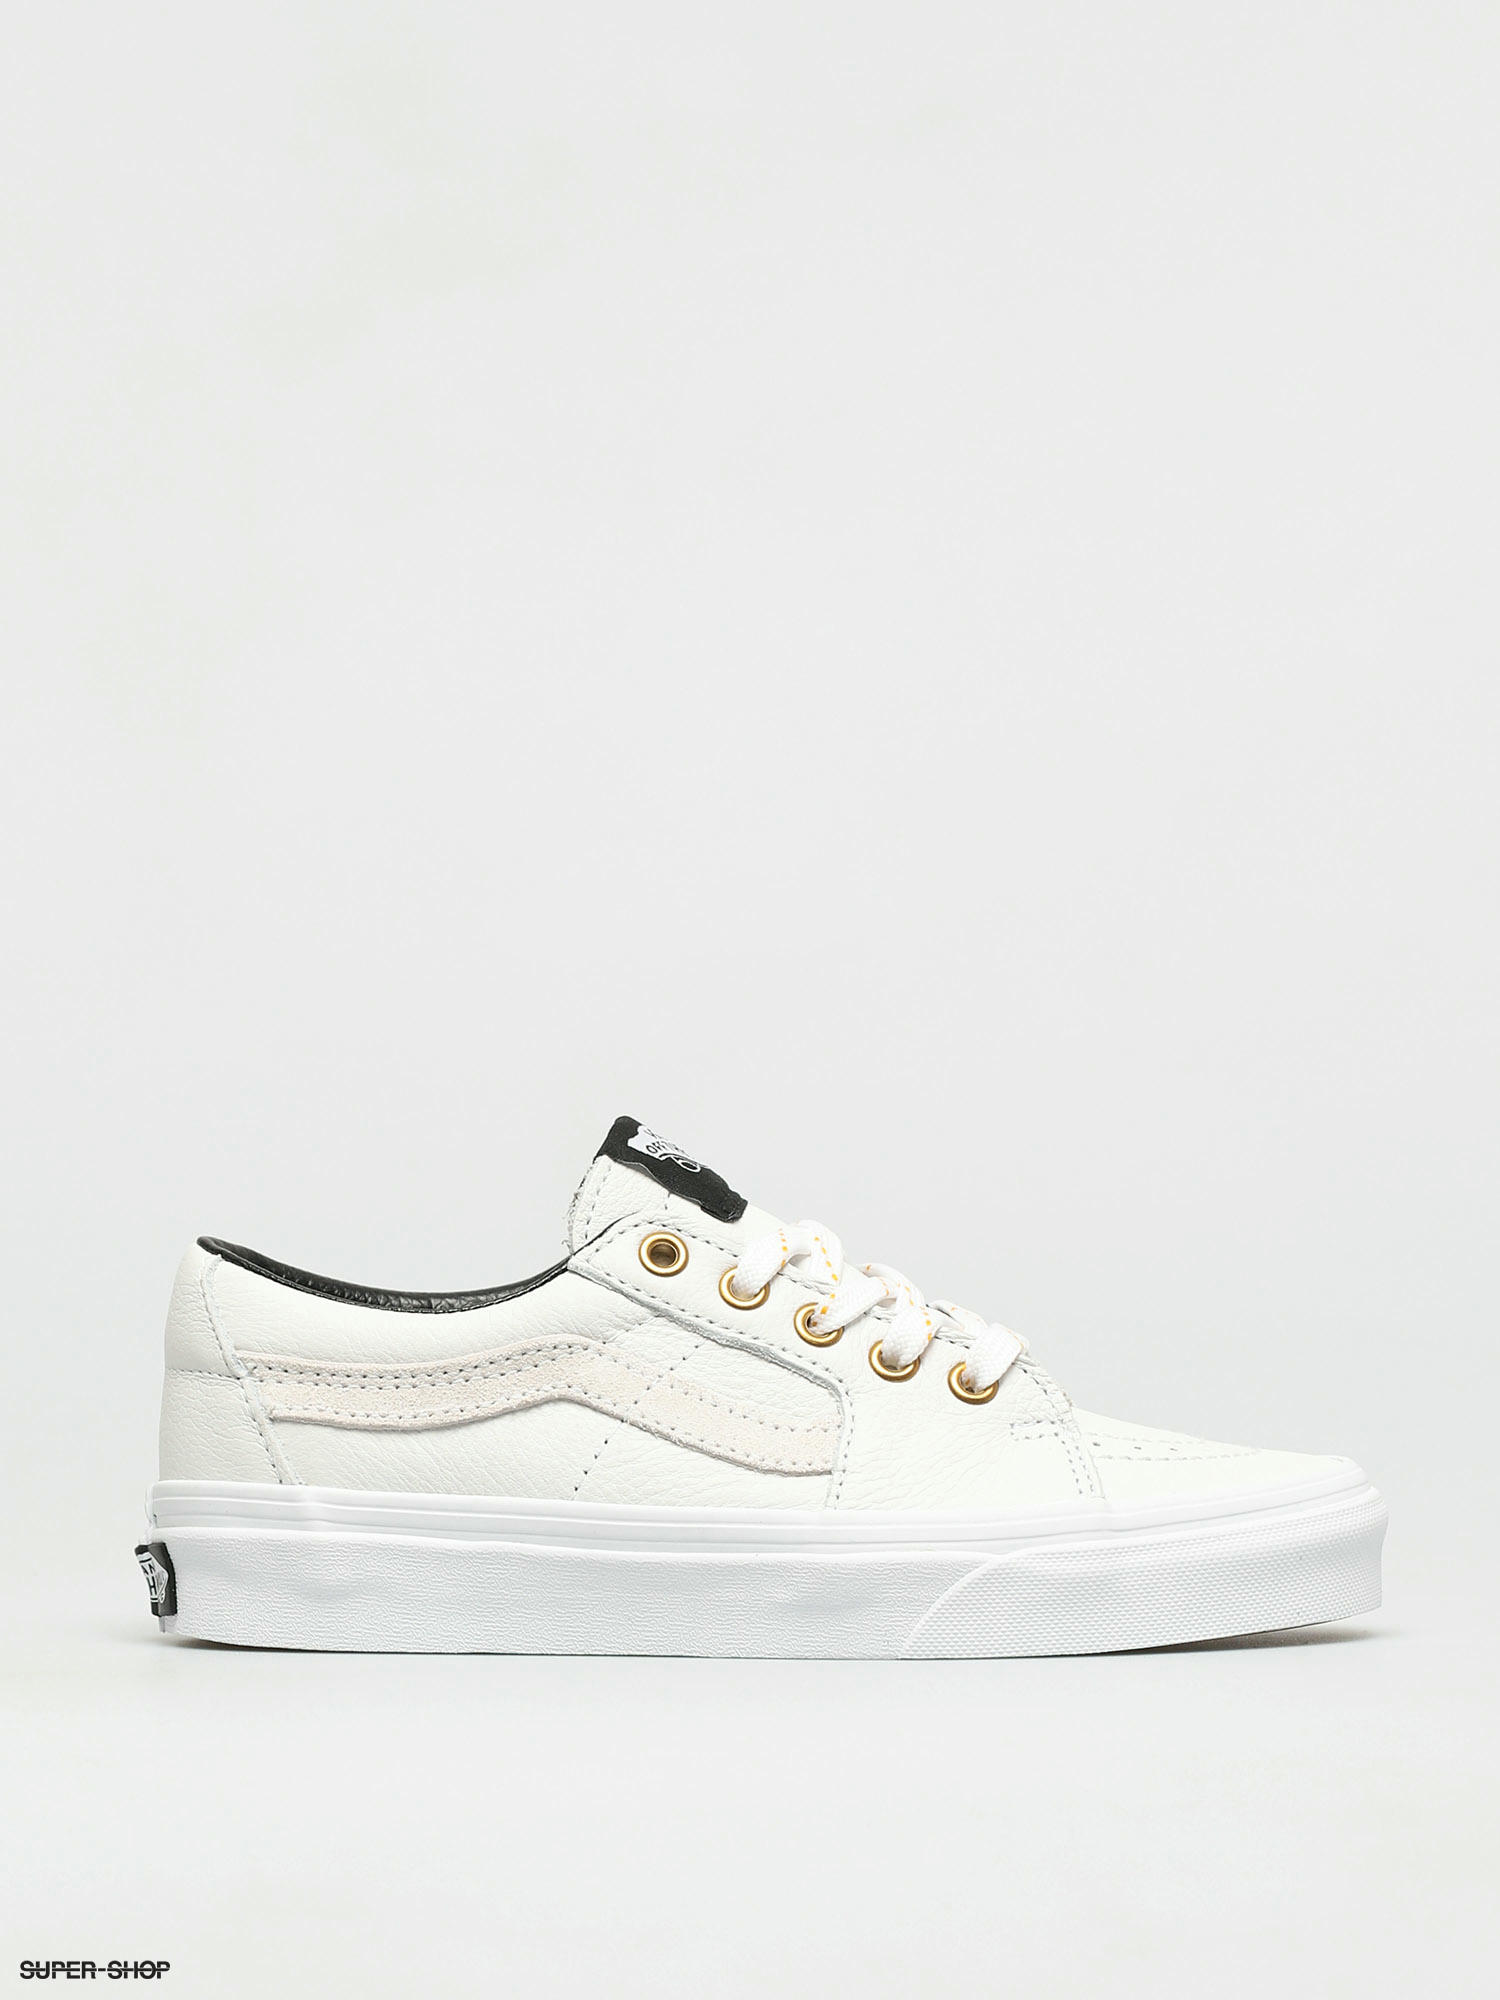 white leather low top vans